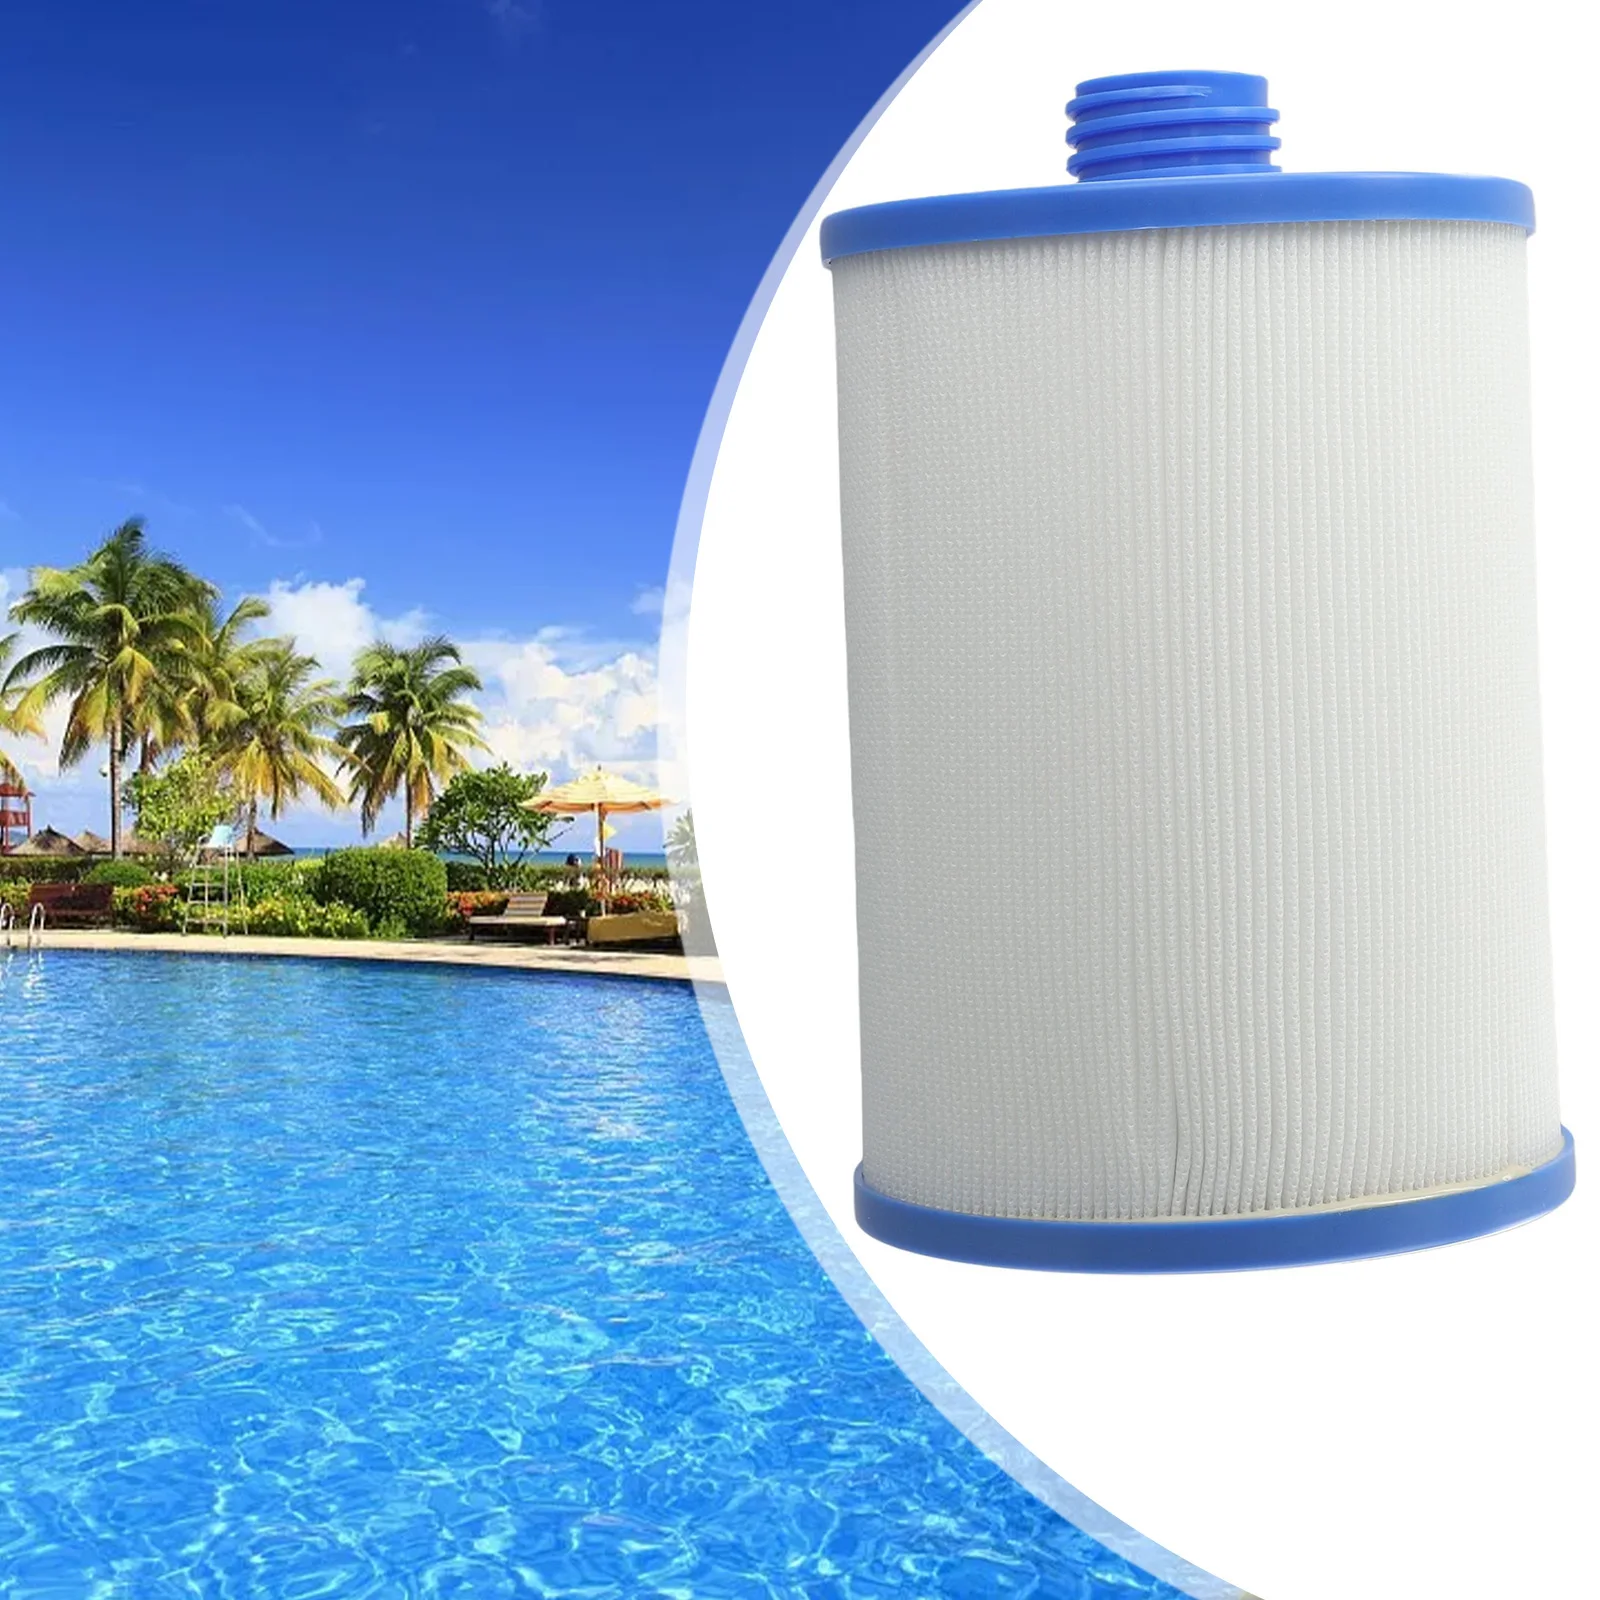 Children's Swimming Pool SPA Bathtub Filter Filter Element Replacement Suitable For PWW50 6CH-940 Filter Element Bathtub Filter